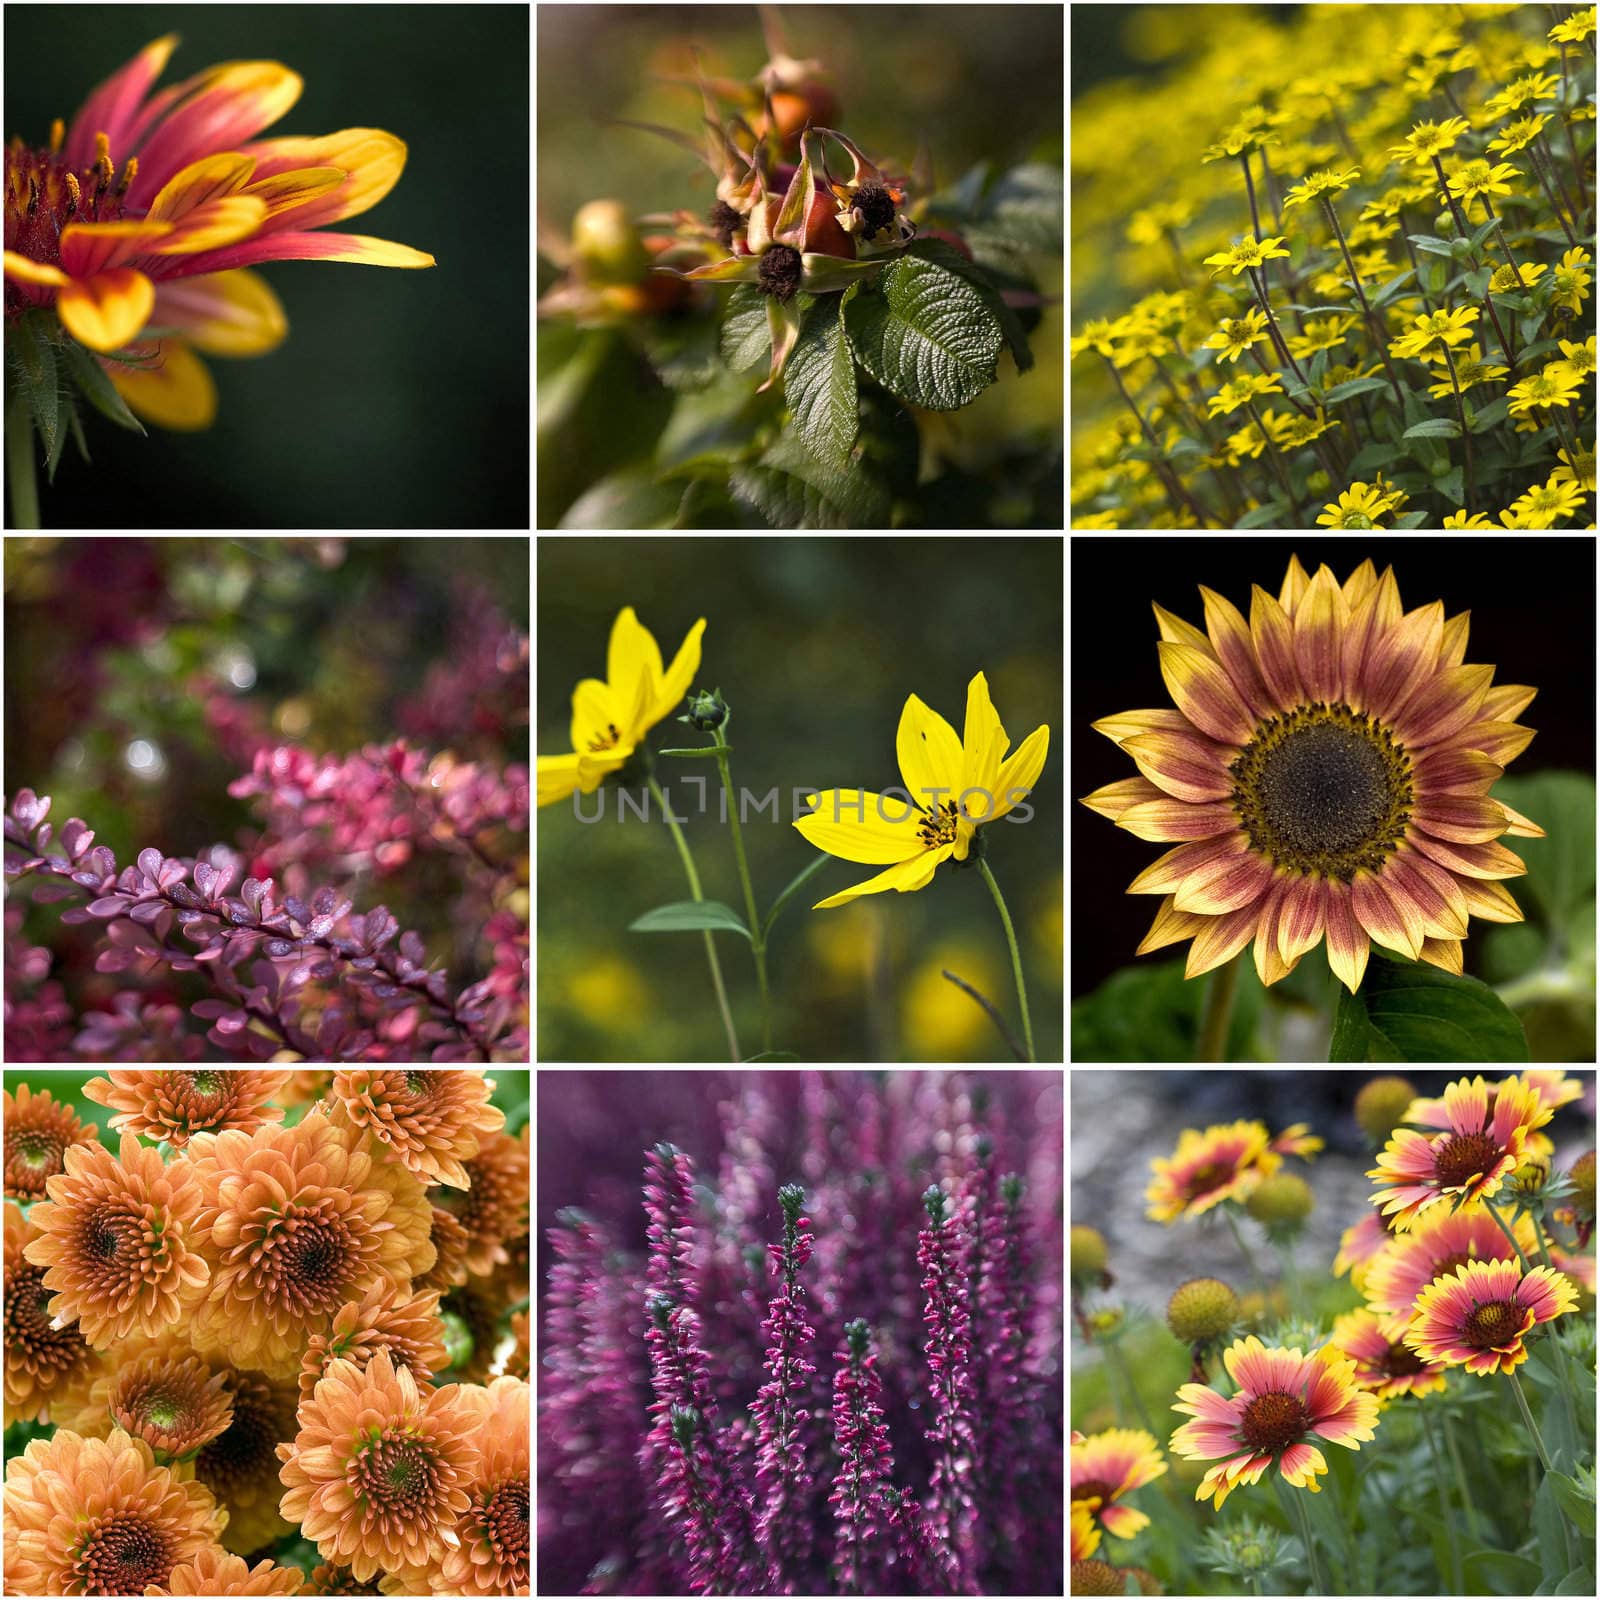 collection of autumnal flowers by miradrozdowski